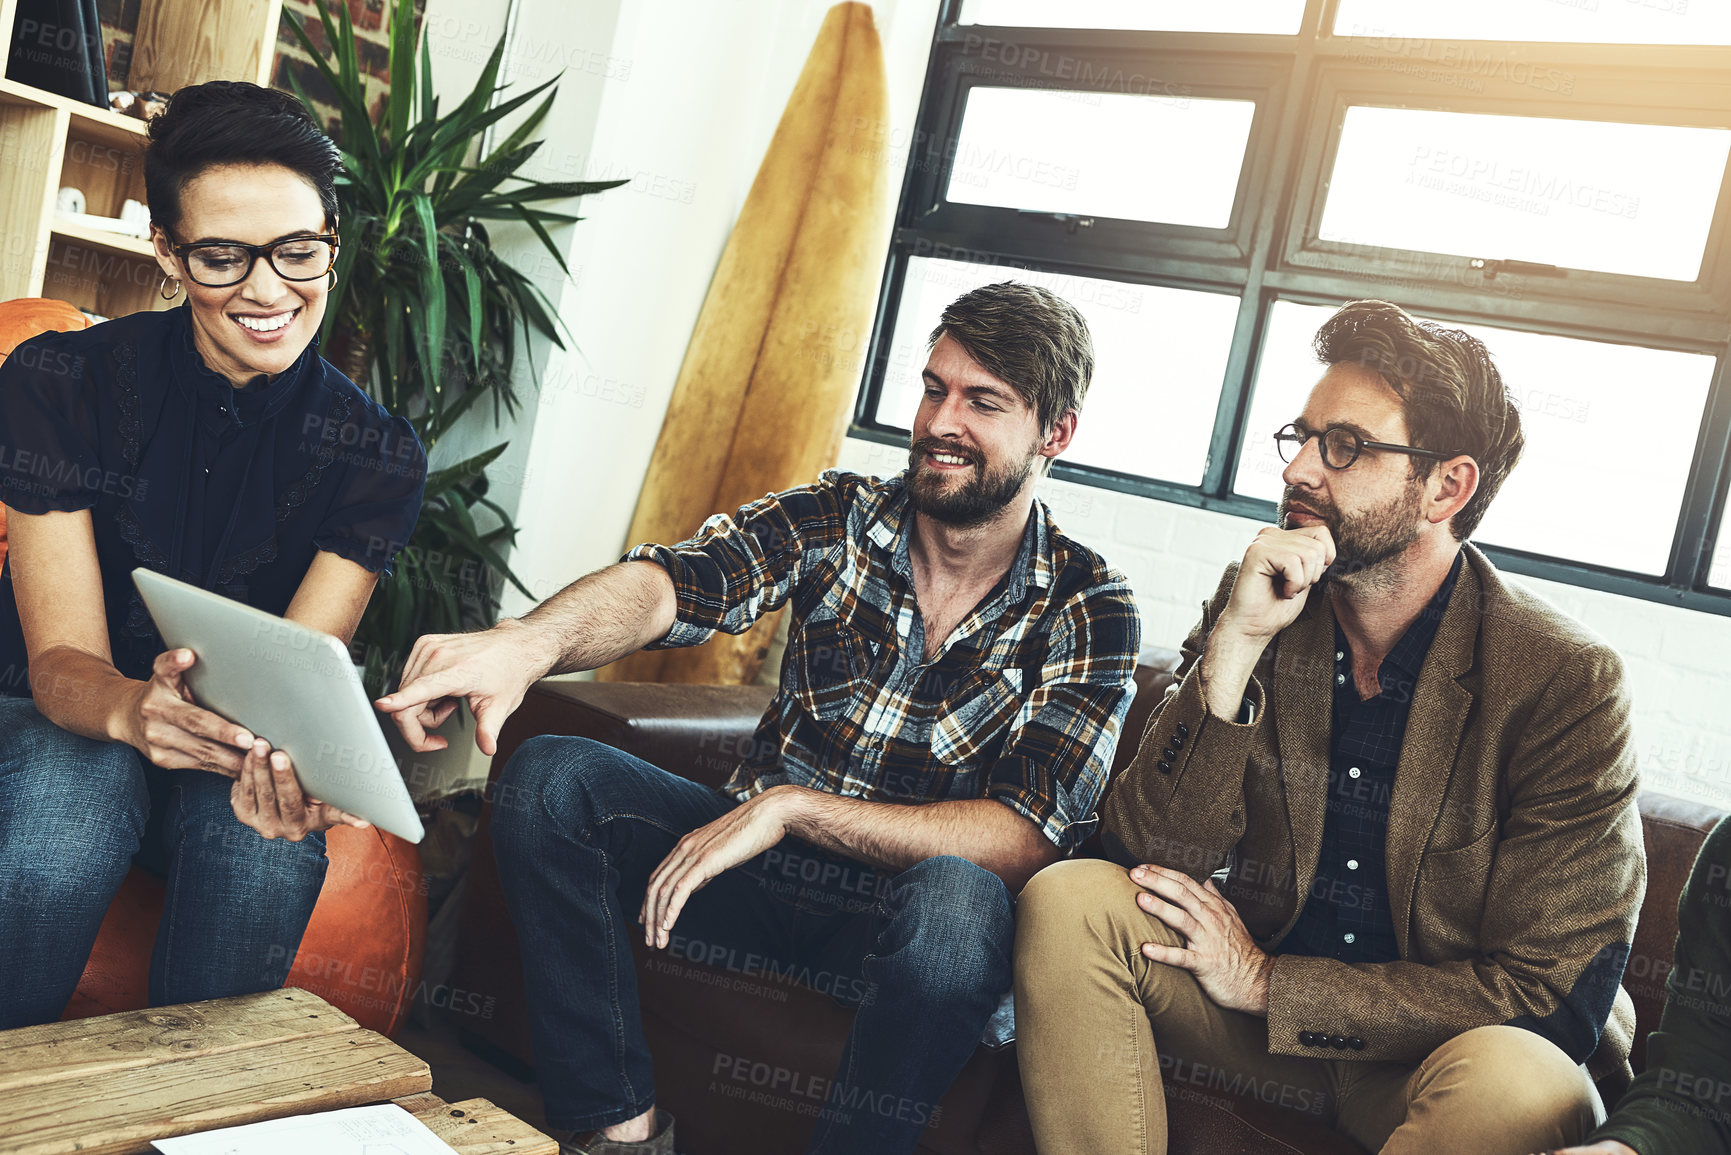 Buy stock photo Shot of a group of designers using a tablet in their brainstorming session